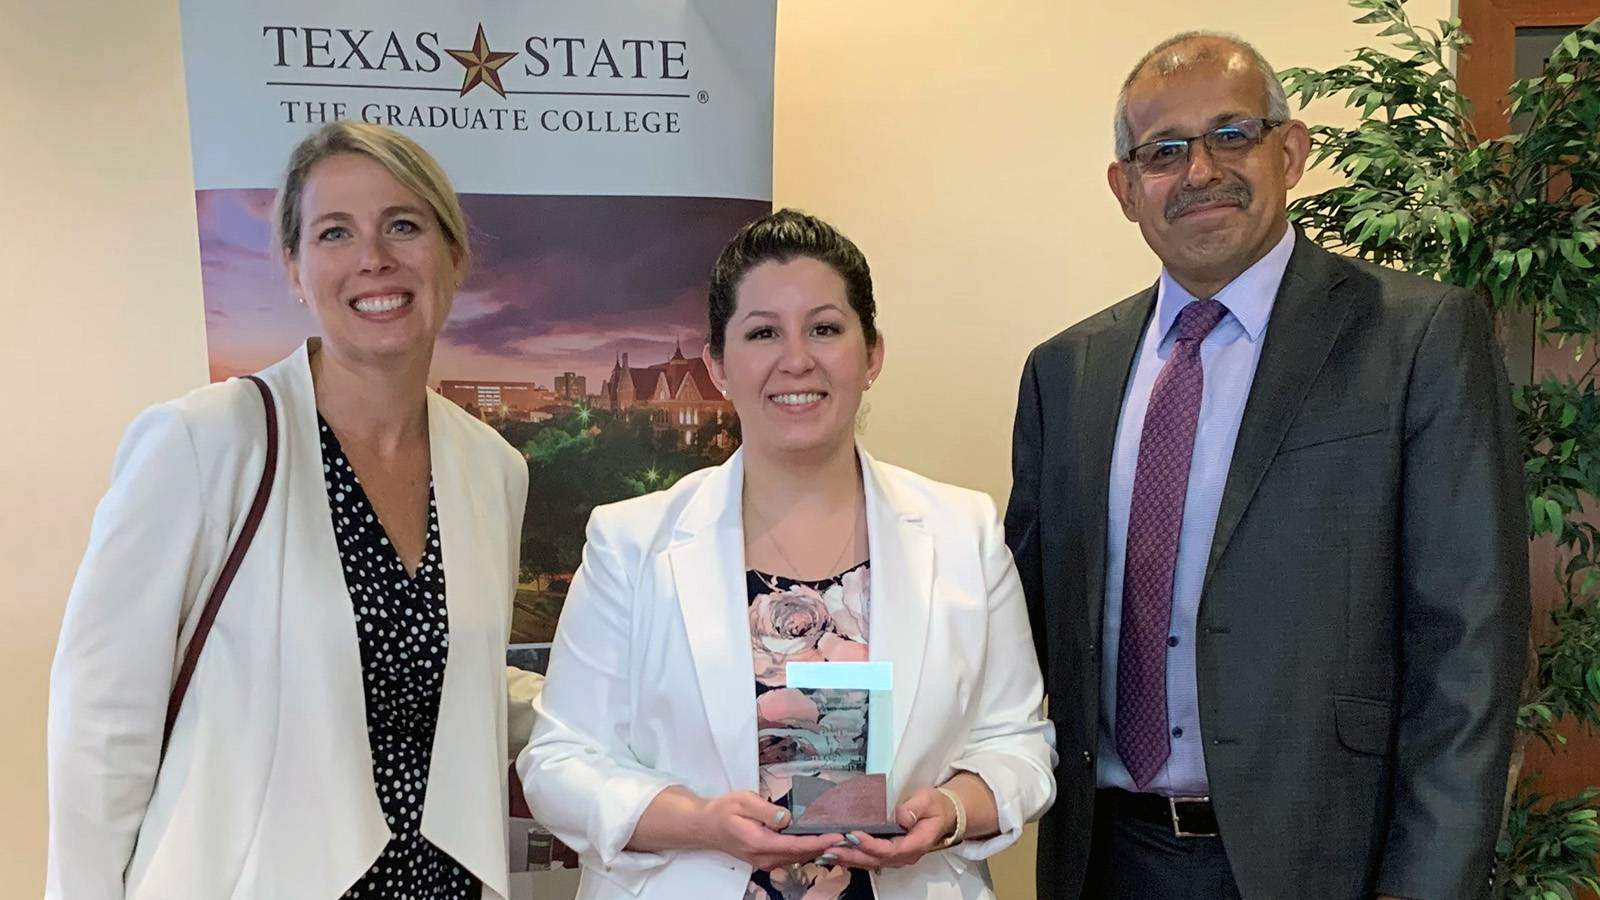 Dr. Kasey Martin, Liesel Bass holding award, and Dr. Diego Vacaflores